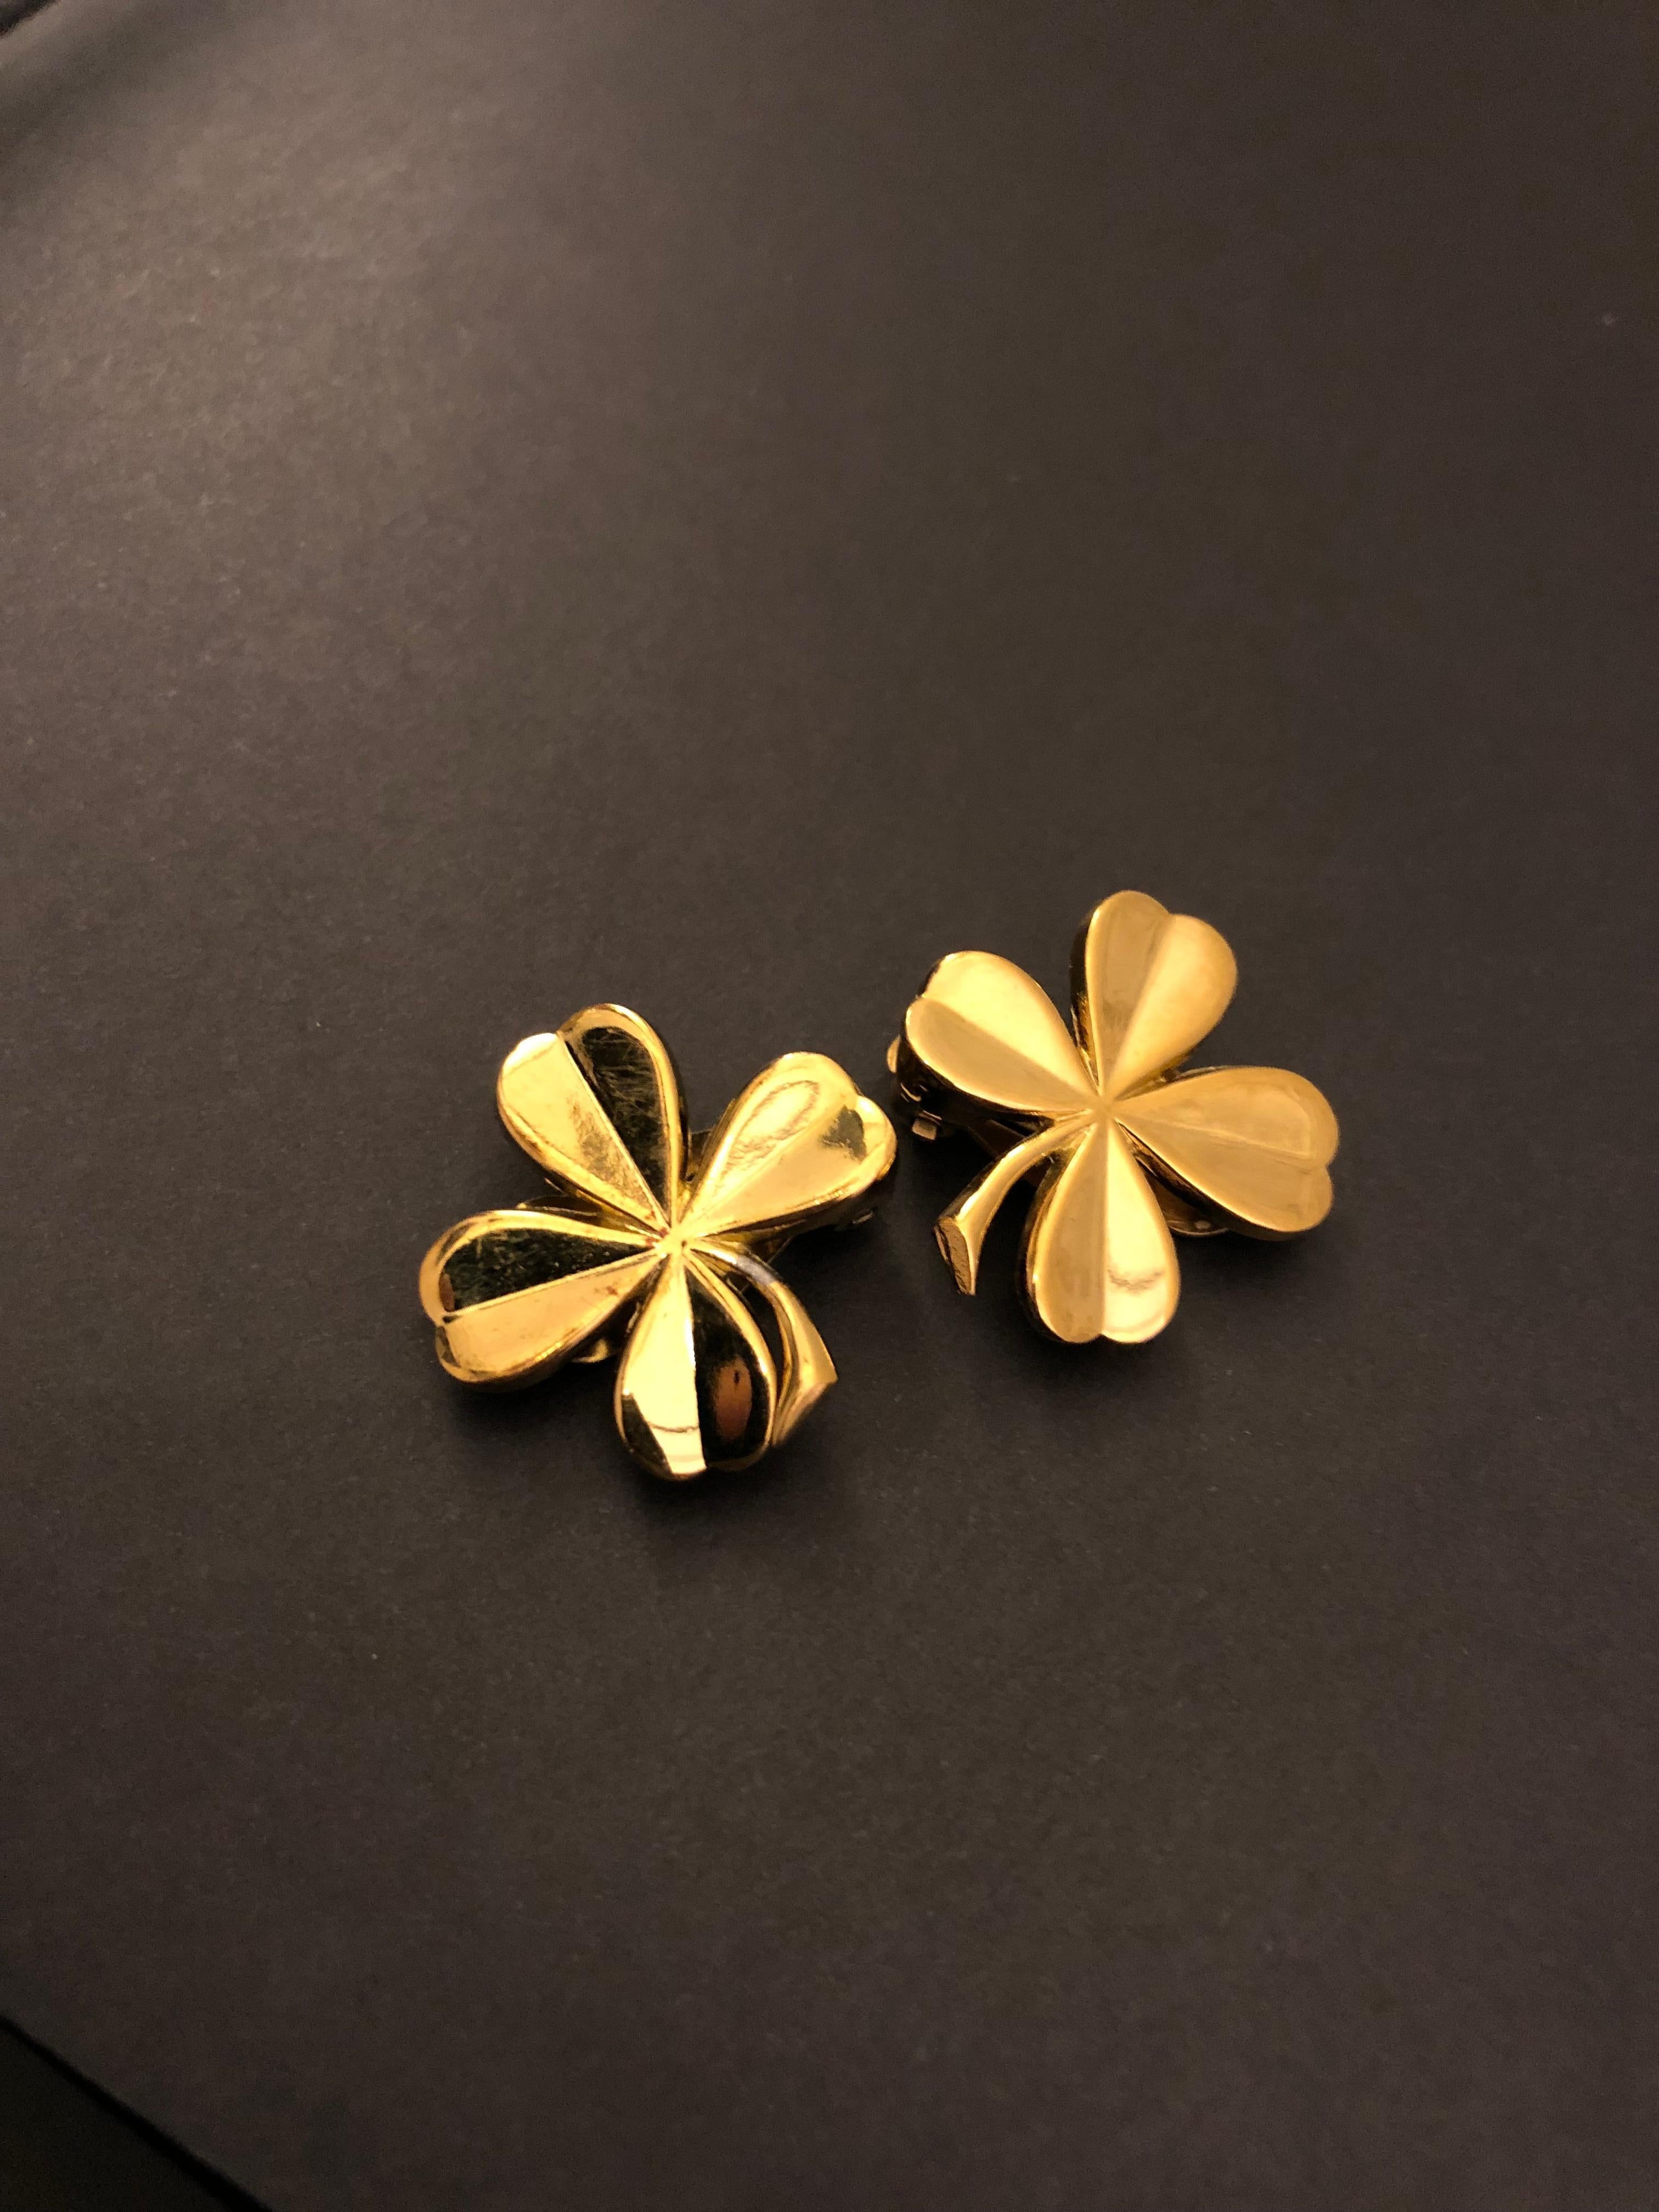 Vintage CHANEL gold toned clip-on earrings crafted in Chanel’s iconic clover leaf motif. Clover leaf represents good luck which was often used by CoCo Chanel in creating jewelry pieces. Stamped CHANEL 94A made in France. Width measures approximately